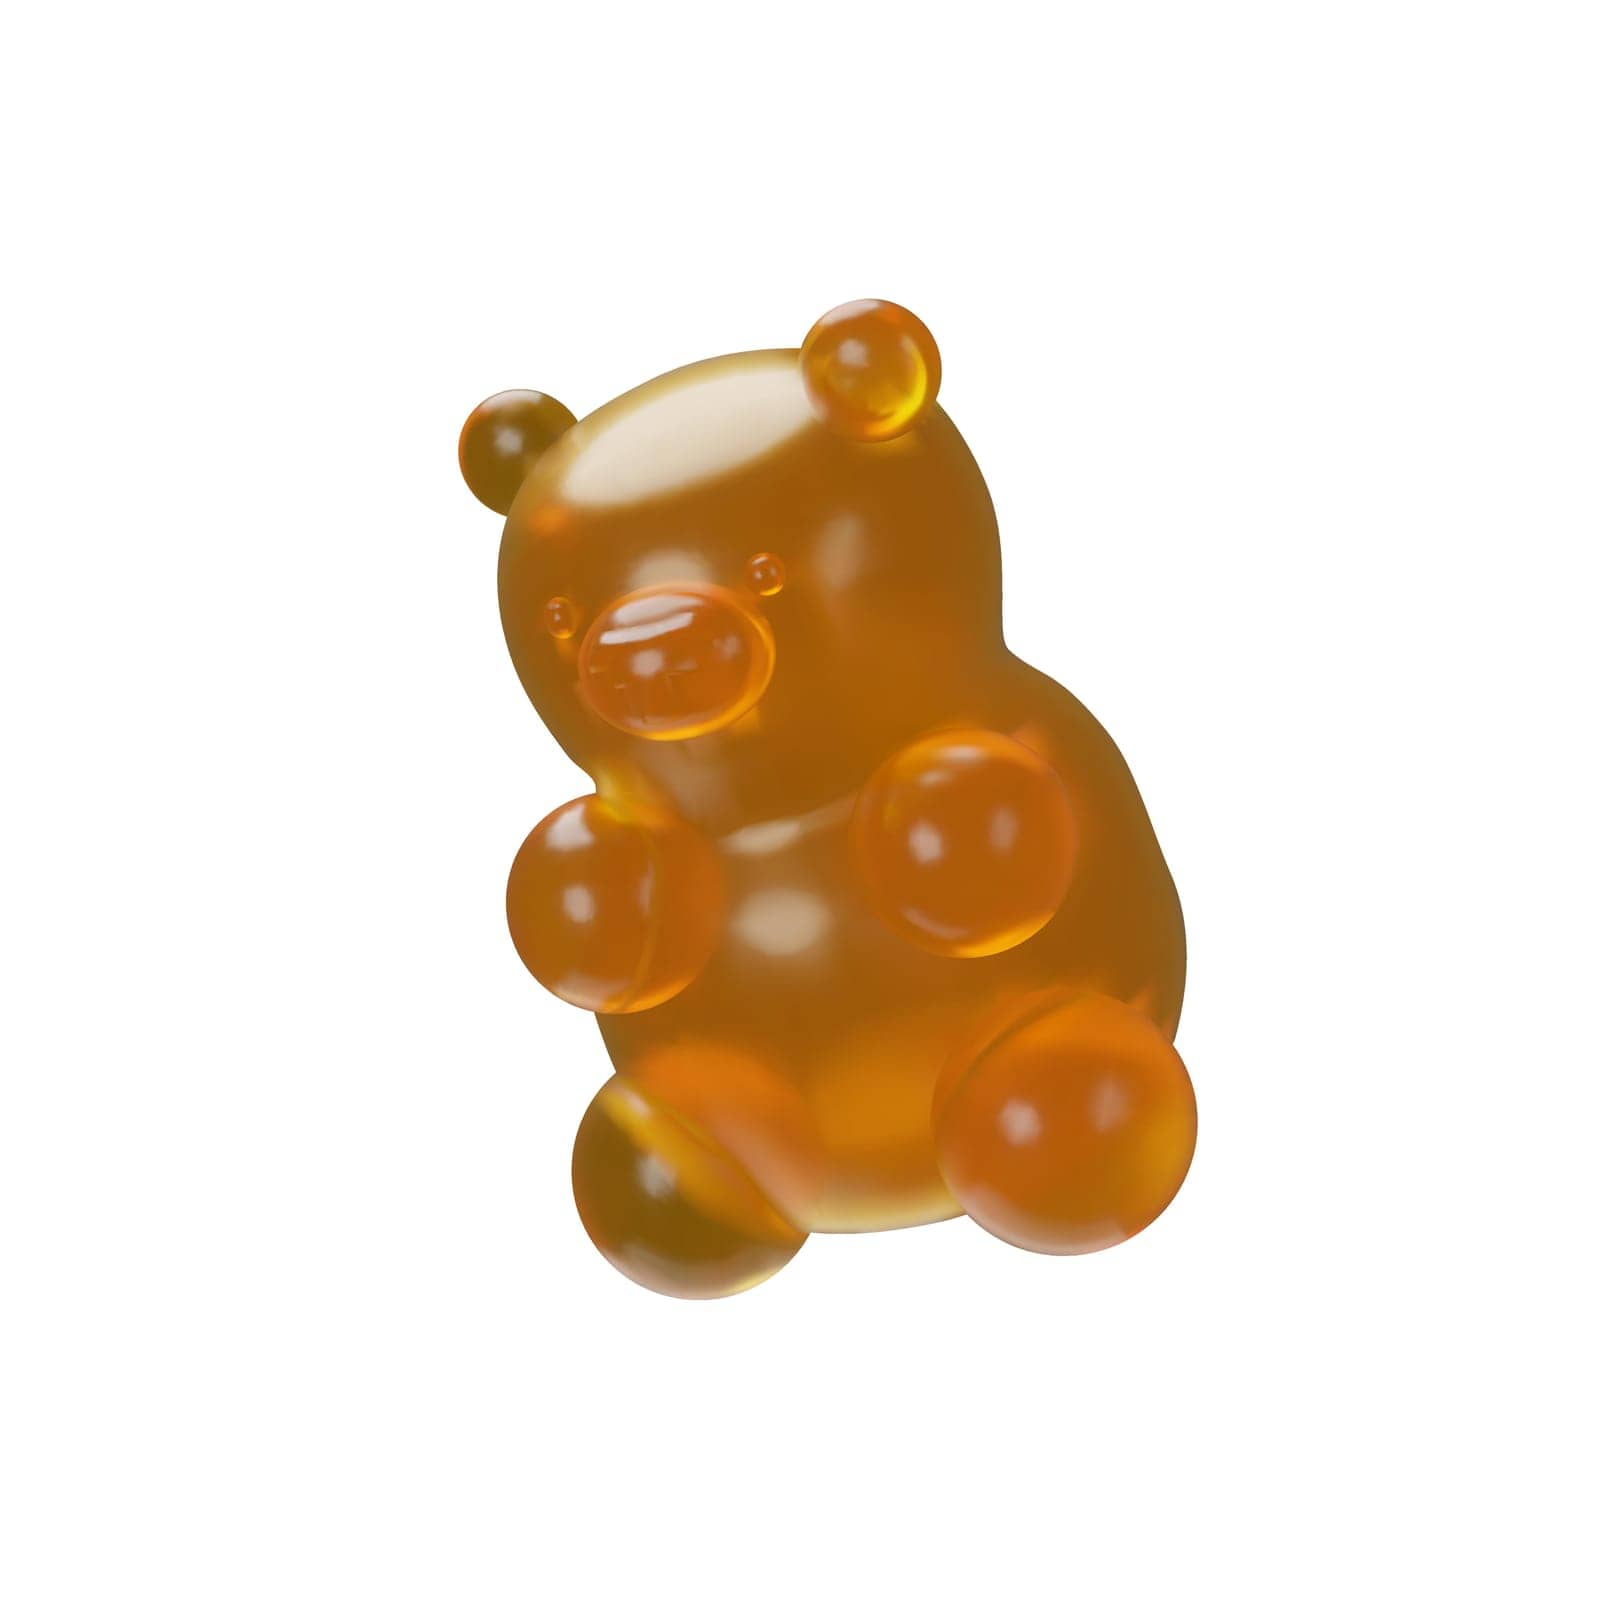 3D render orange gummy bear. Realistic gummyfied. Sweet Chewable supplements. Chewy delicious snack. Edible health candy. Vector illustration fruit dessert. menthol Gummy Form factor vitamins.